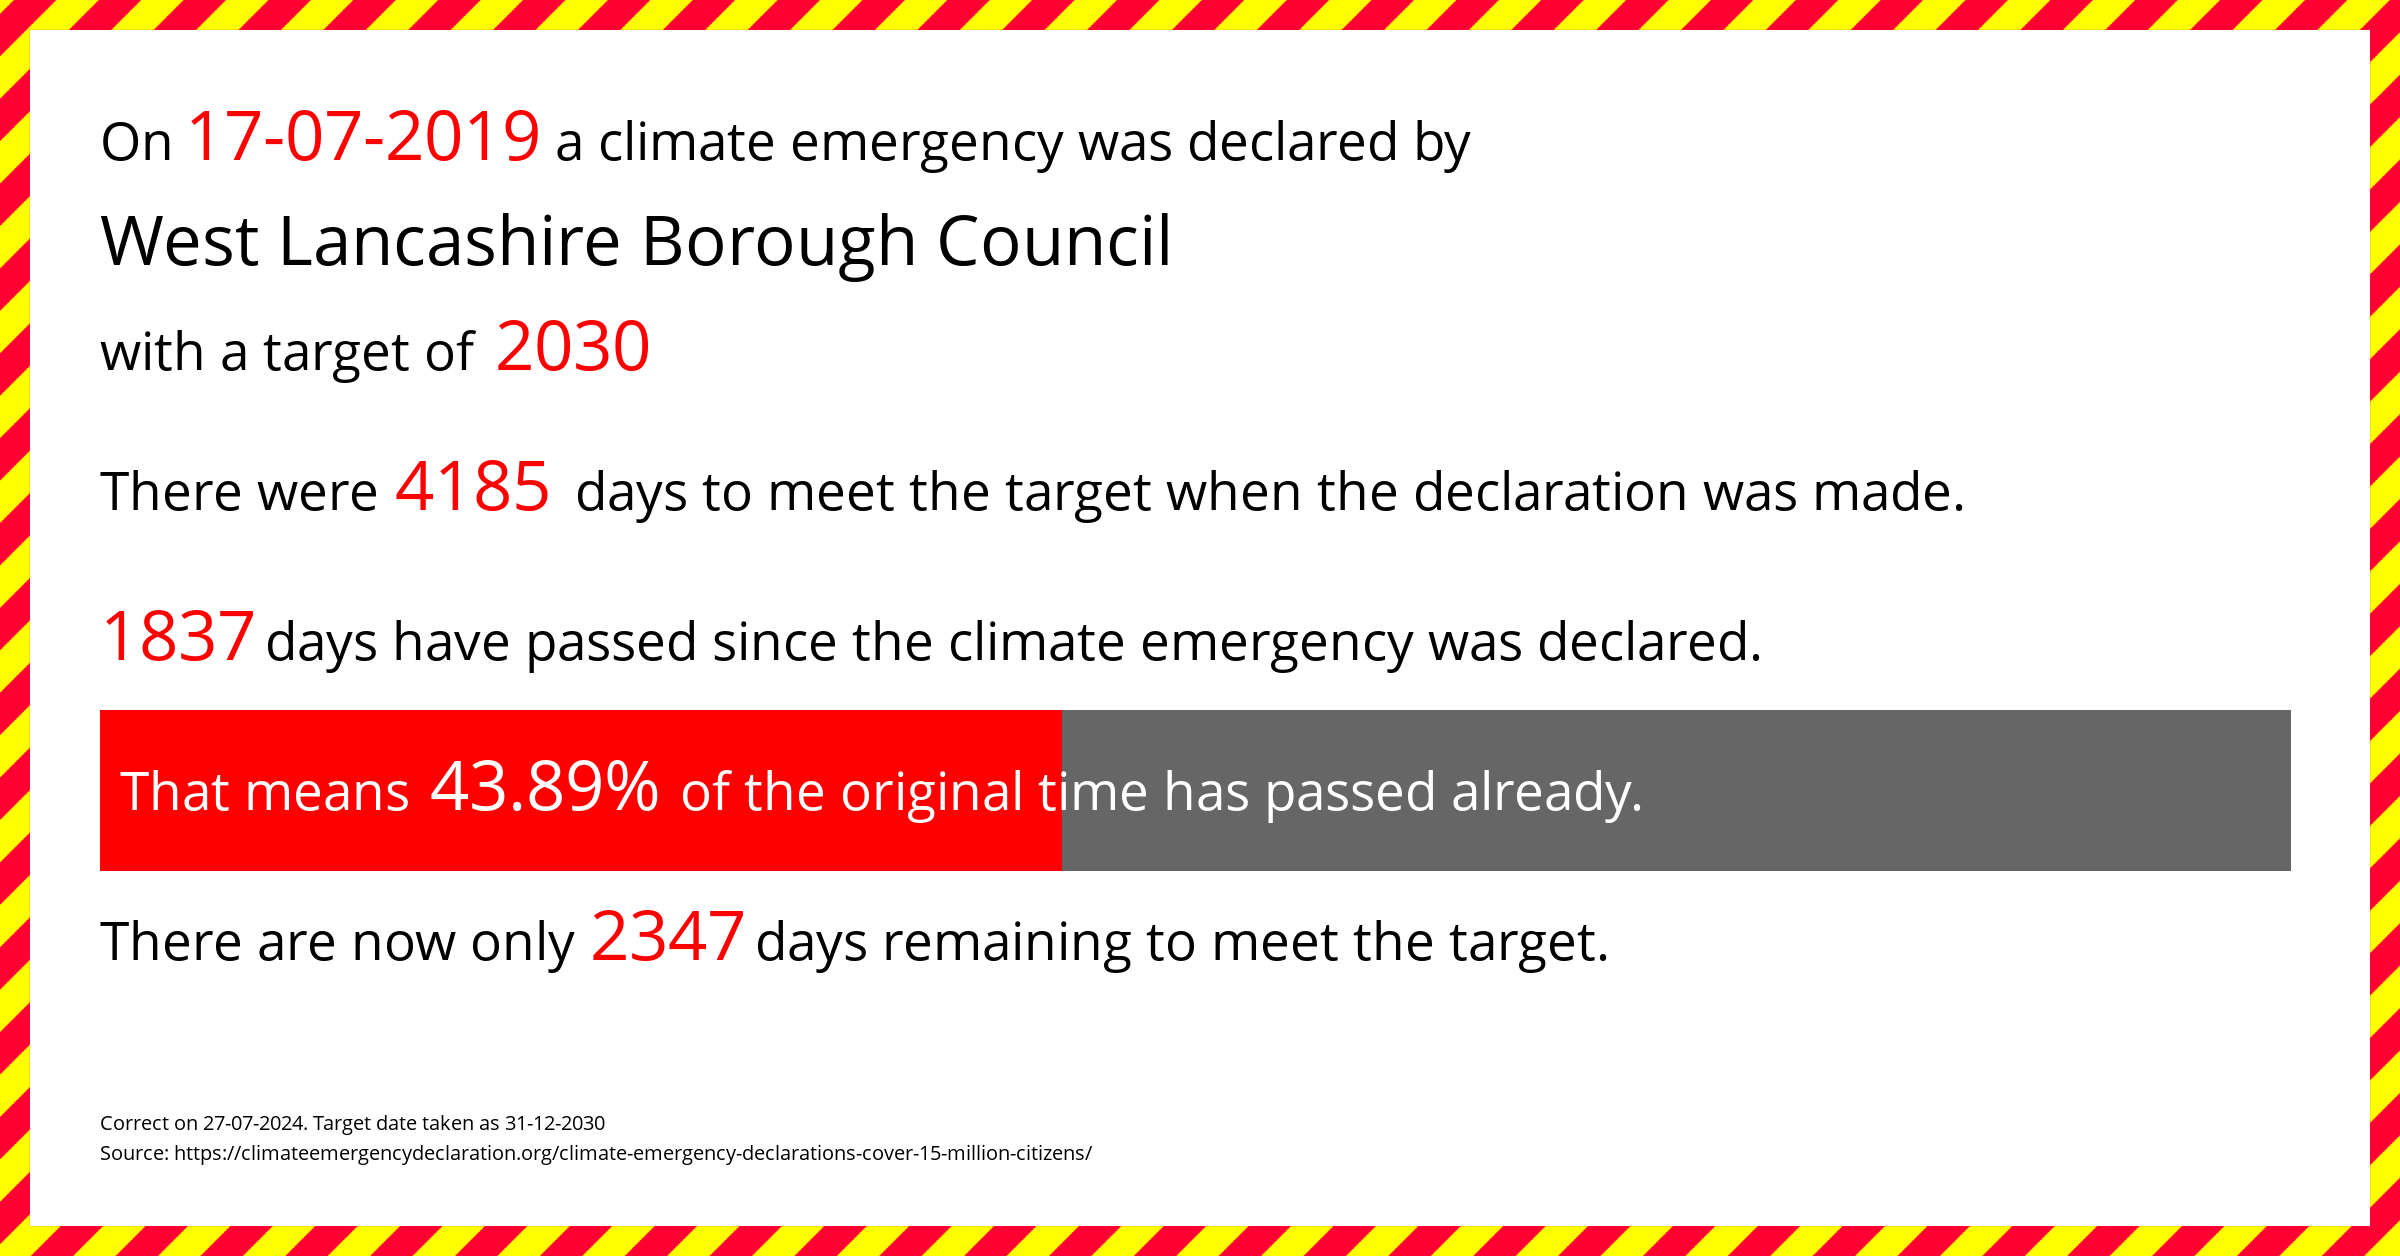 West Lancashire Borough Council declared a Climate emergency on Wednesday 17th July 2019, with a target of 2030.